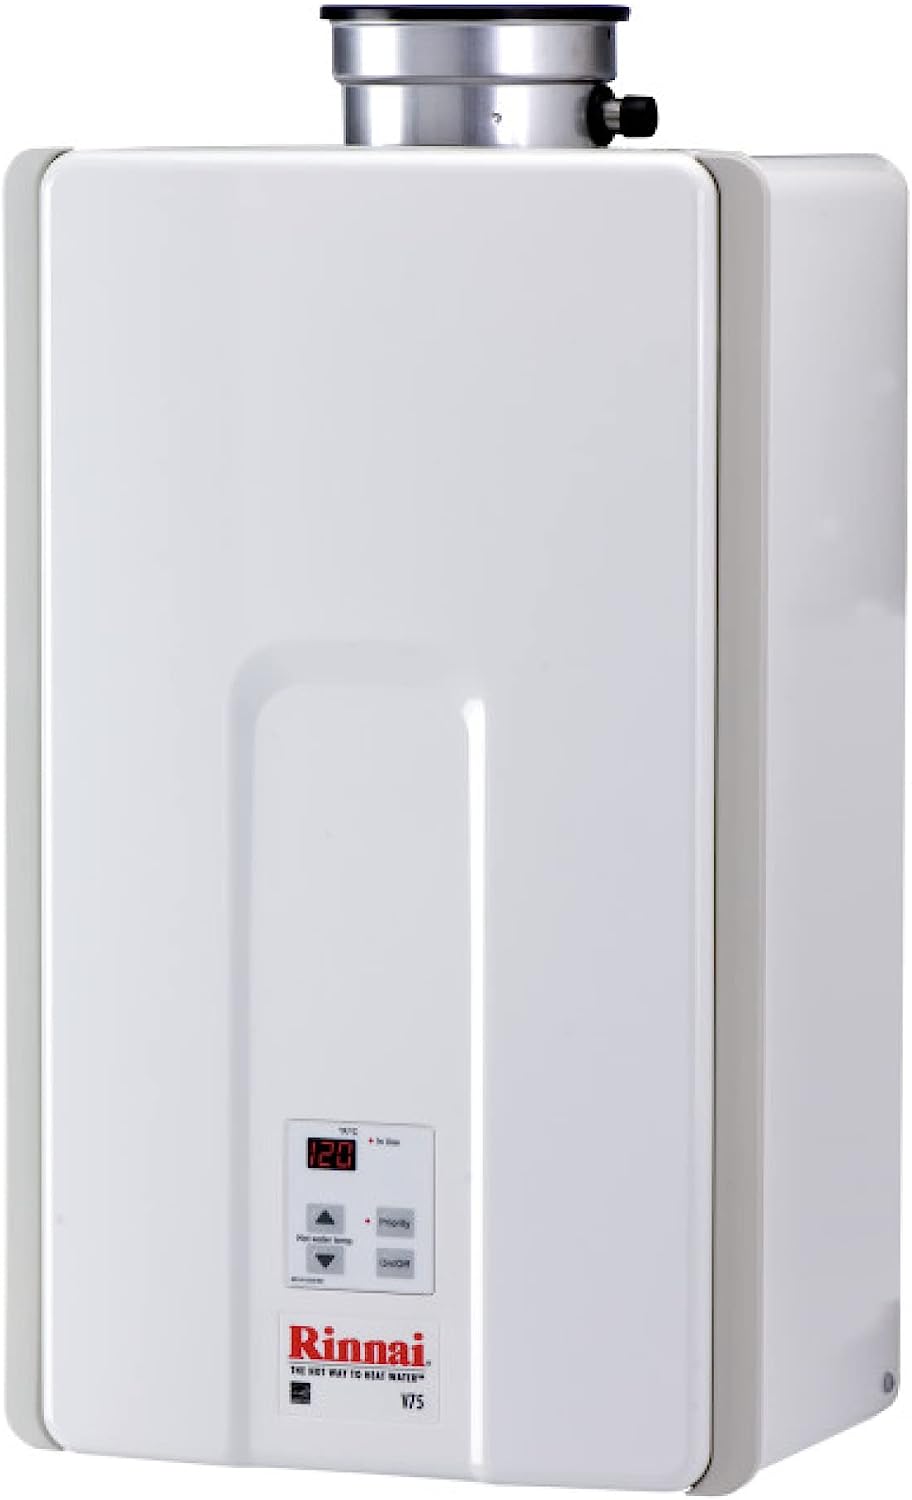 Rinnai V75IN Tankless Hot Water Heater, 7.5 GPM, [...]